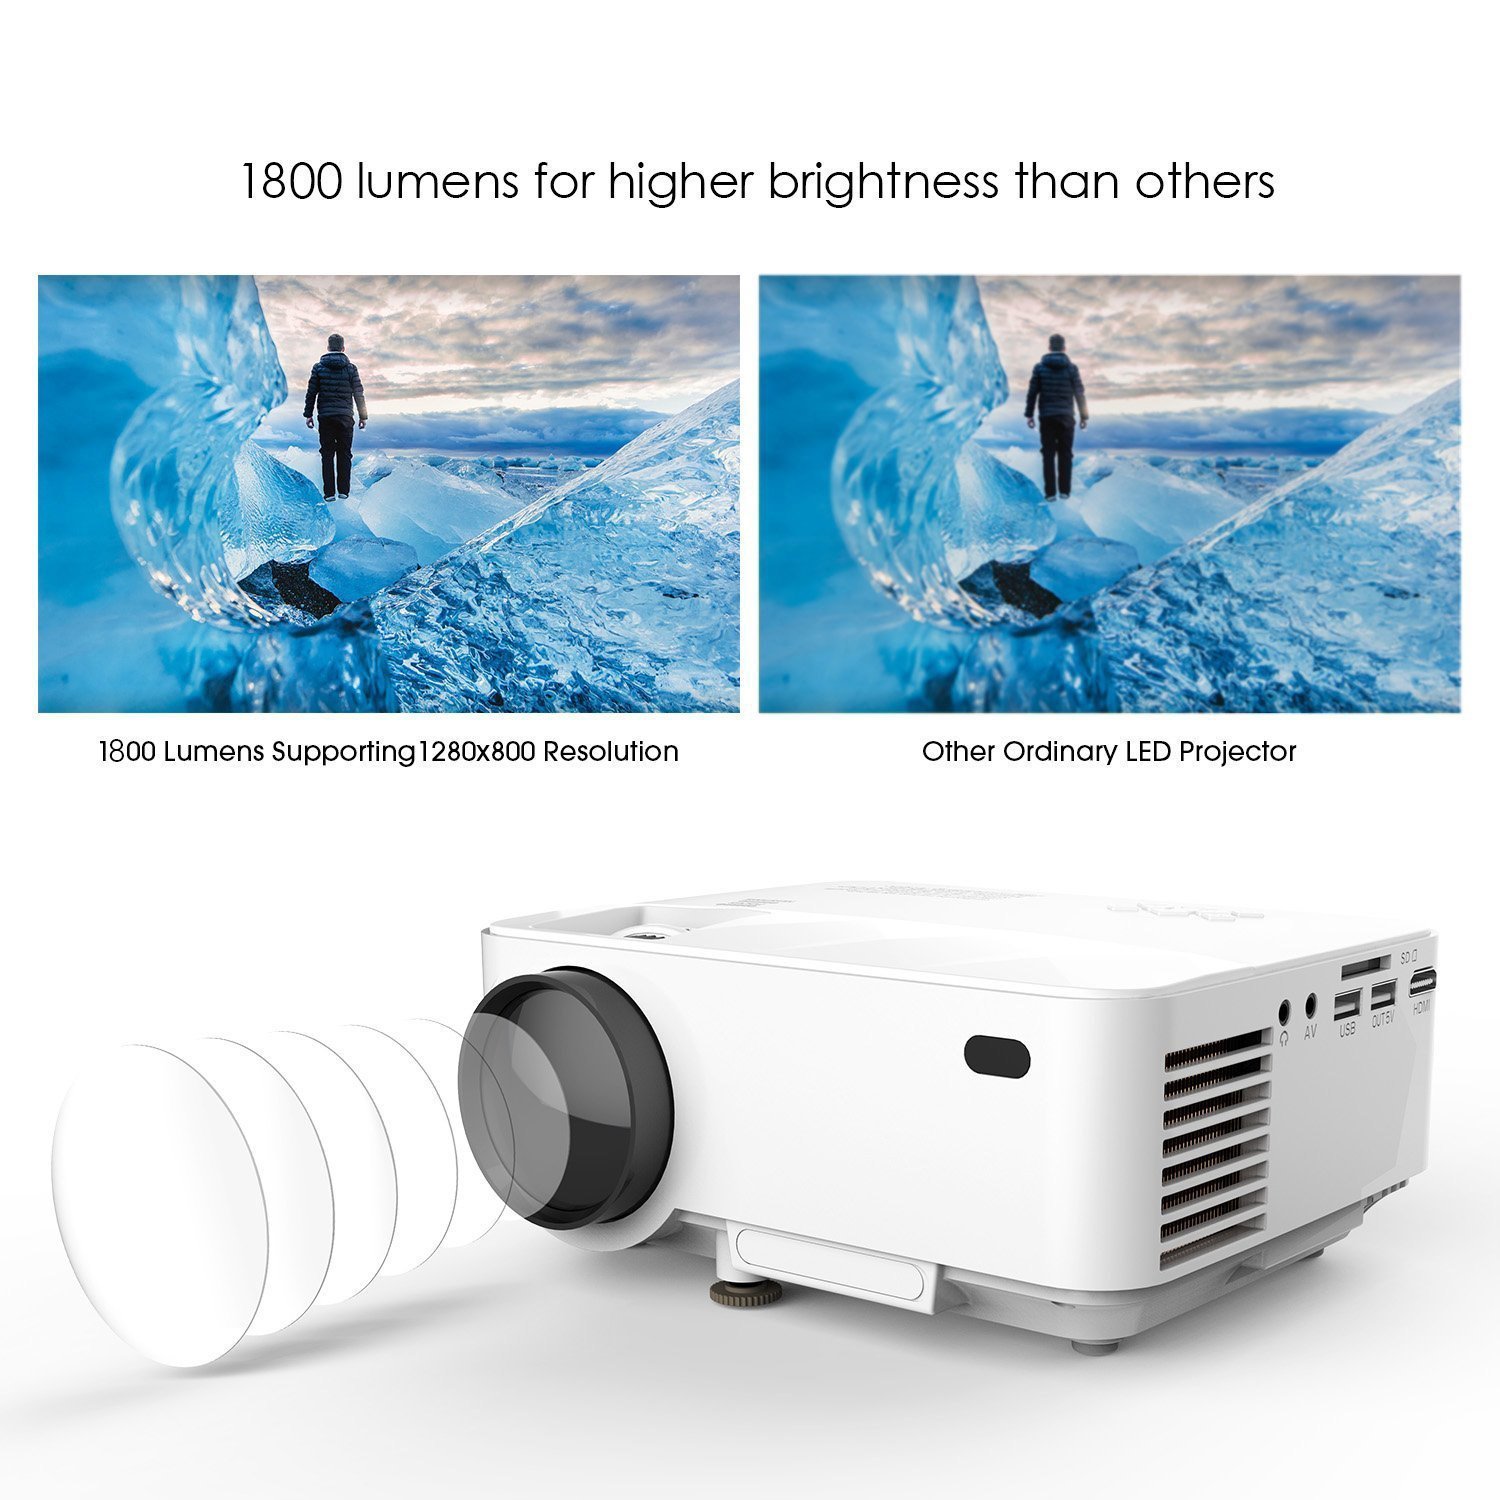 DBPOWER T21 LED Projector - Best Budget Projector to BUY